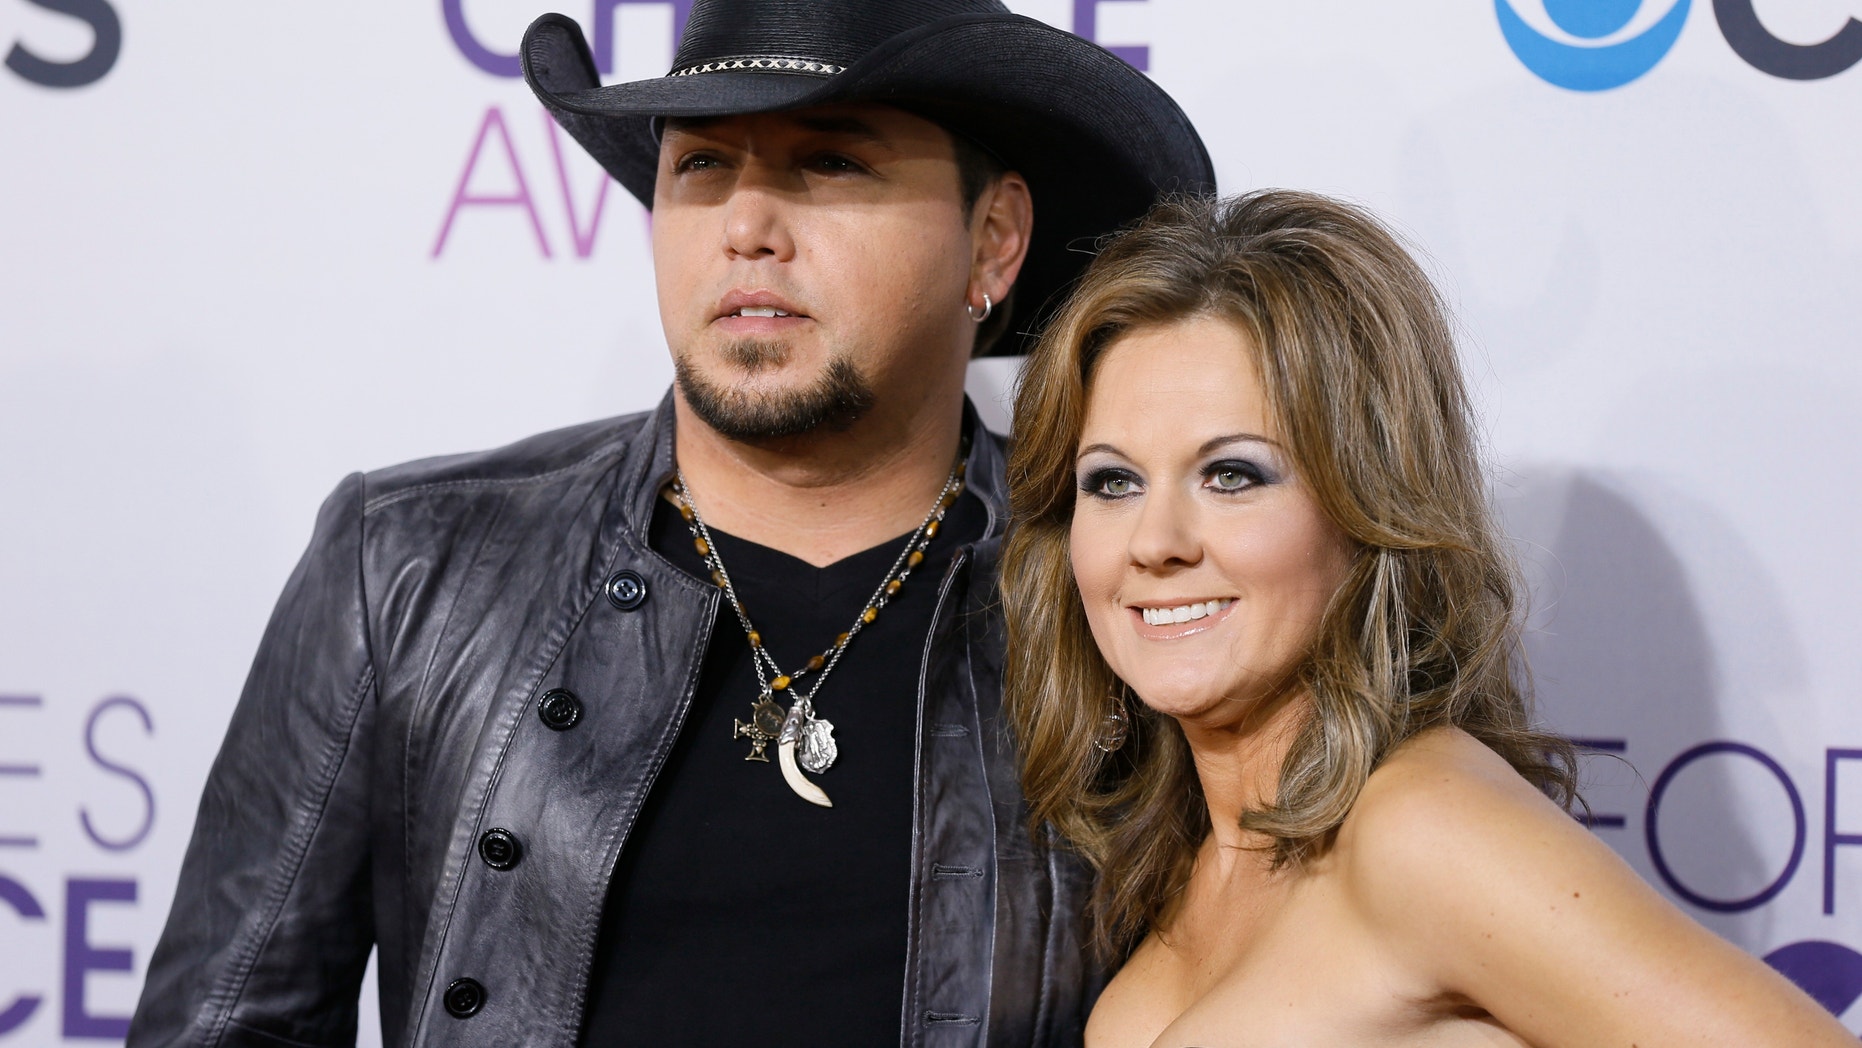 Jason Aldean And His Wife Jessica Ussery Reportedly Split Up Fox News 